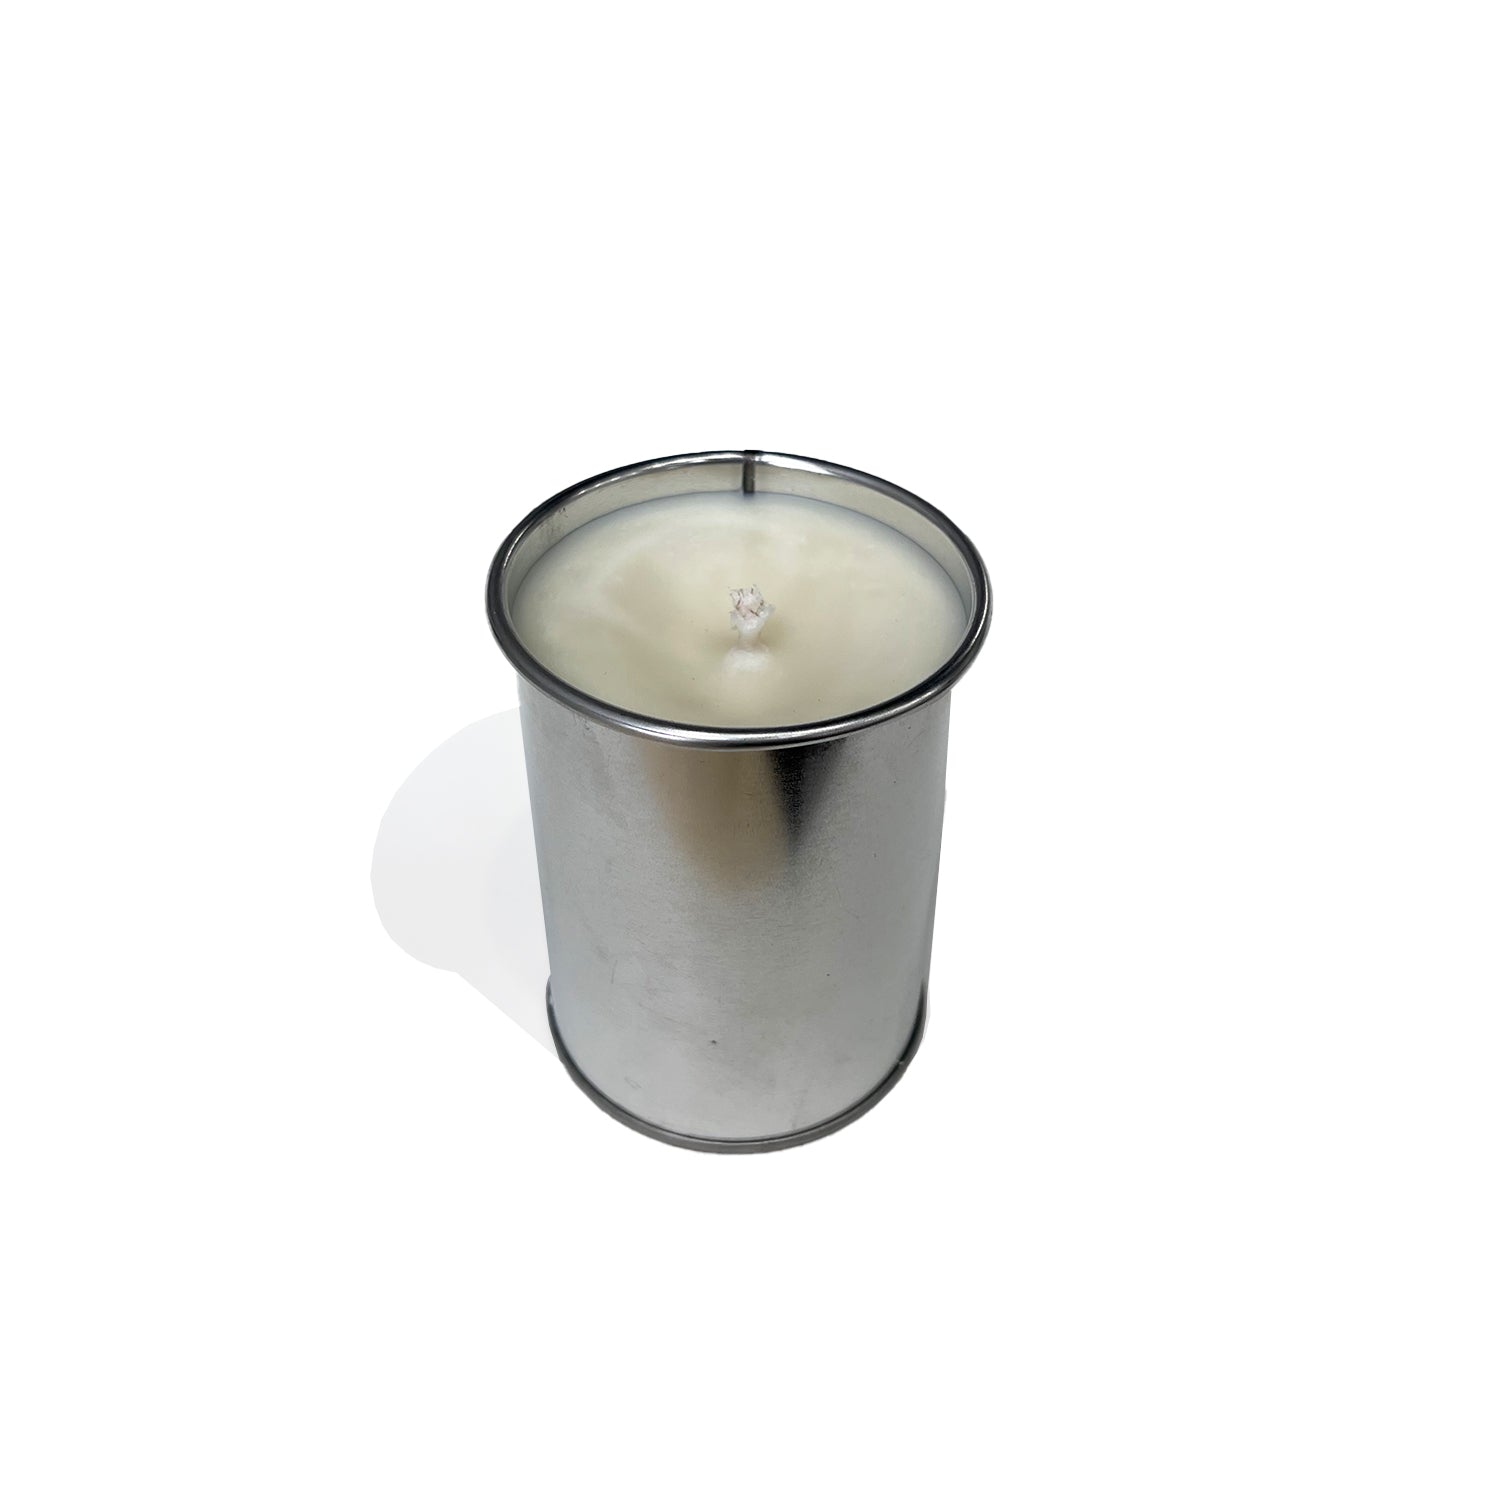 Christmas Fir, Soy Candle | eco+amour